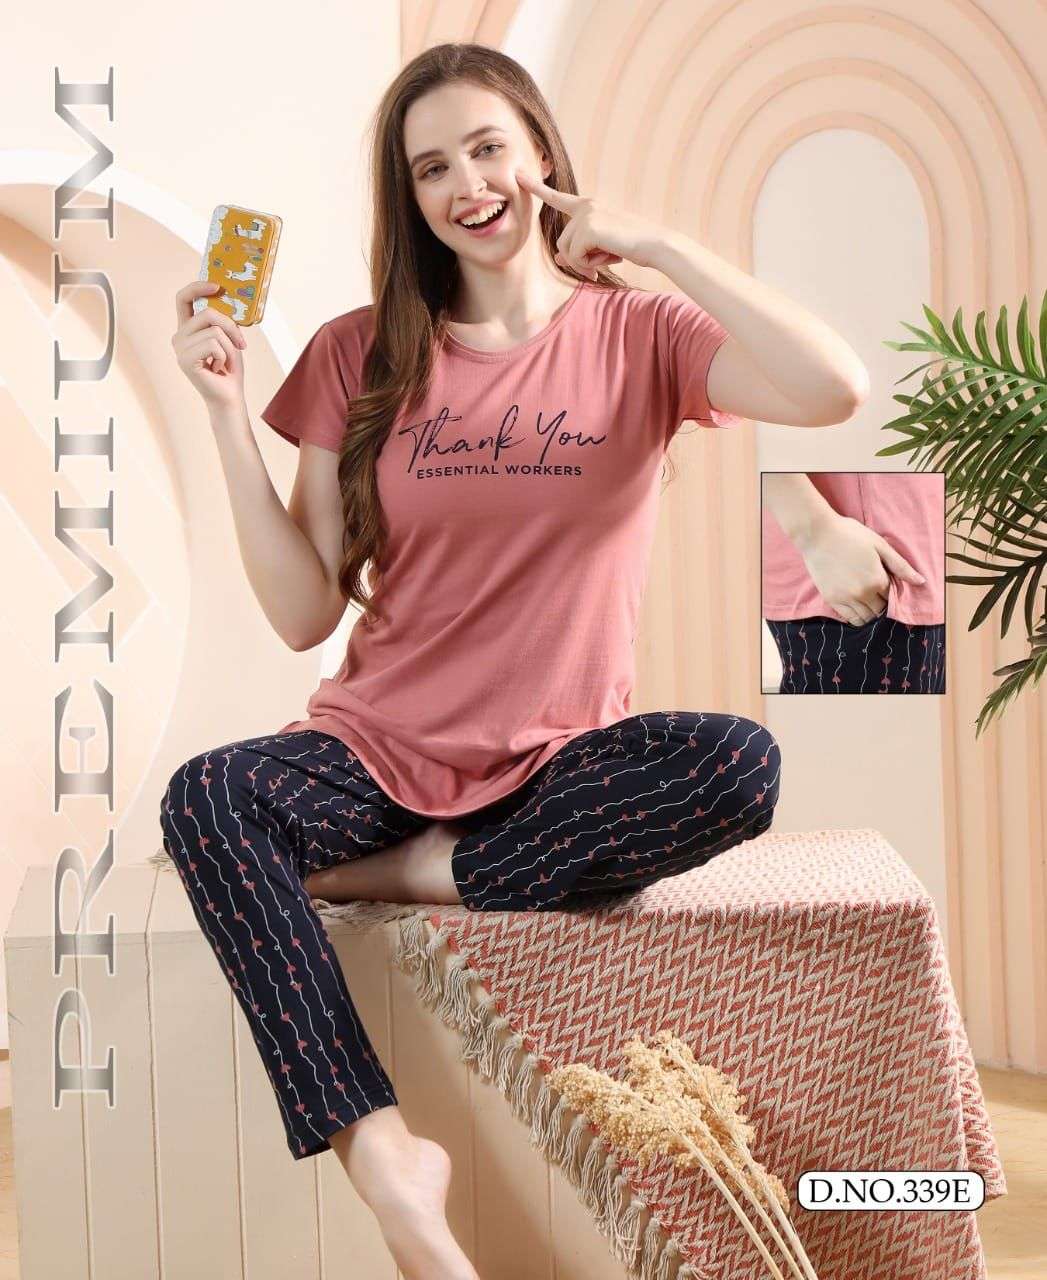 FASHION TALK NEW VOL.339 Heavy Shinker Hosiery Cotton Night Suits With Pocket CATALOG WHOLESALER BEST RATE